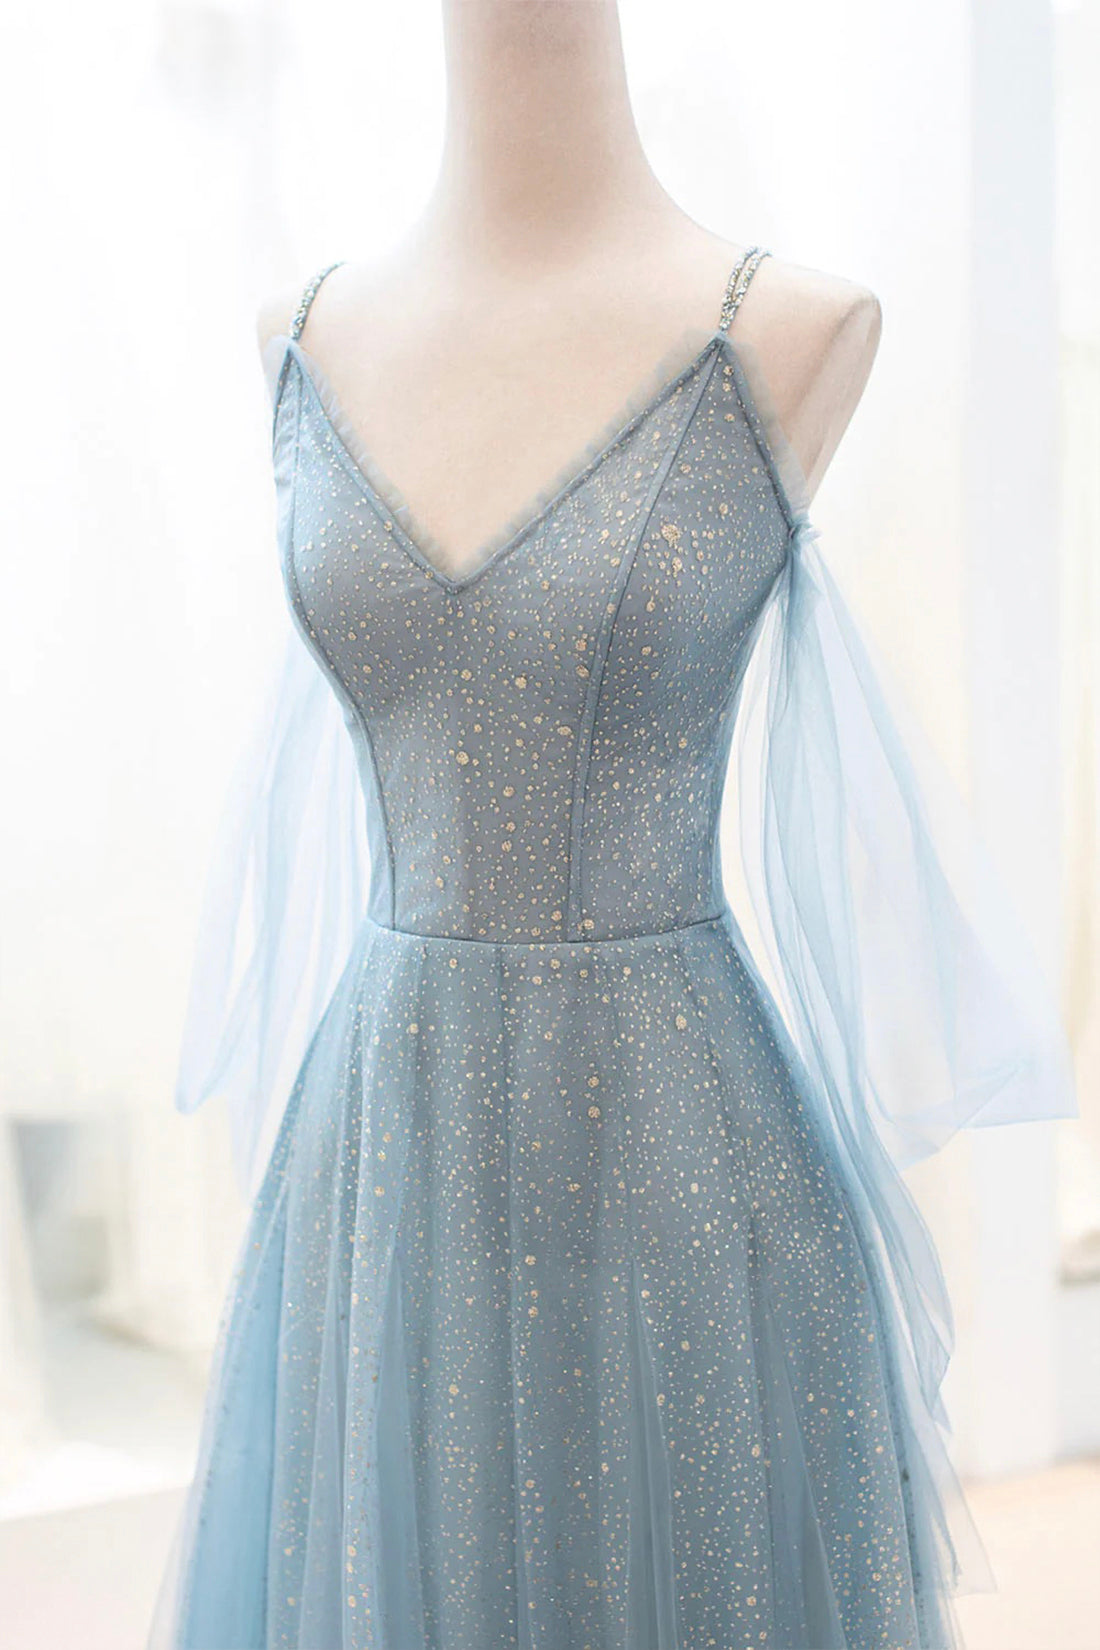 Dusty Blue Sparkly Tulle Long Prom Dress, A-Line Spaghetti Strap Evening Dress